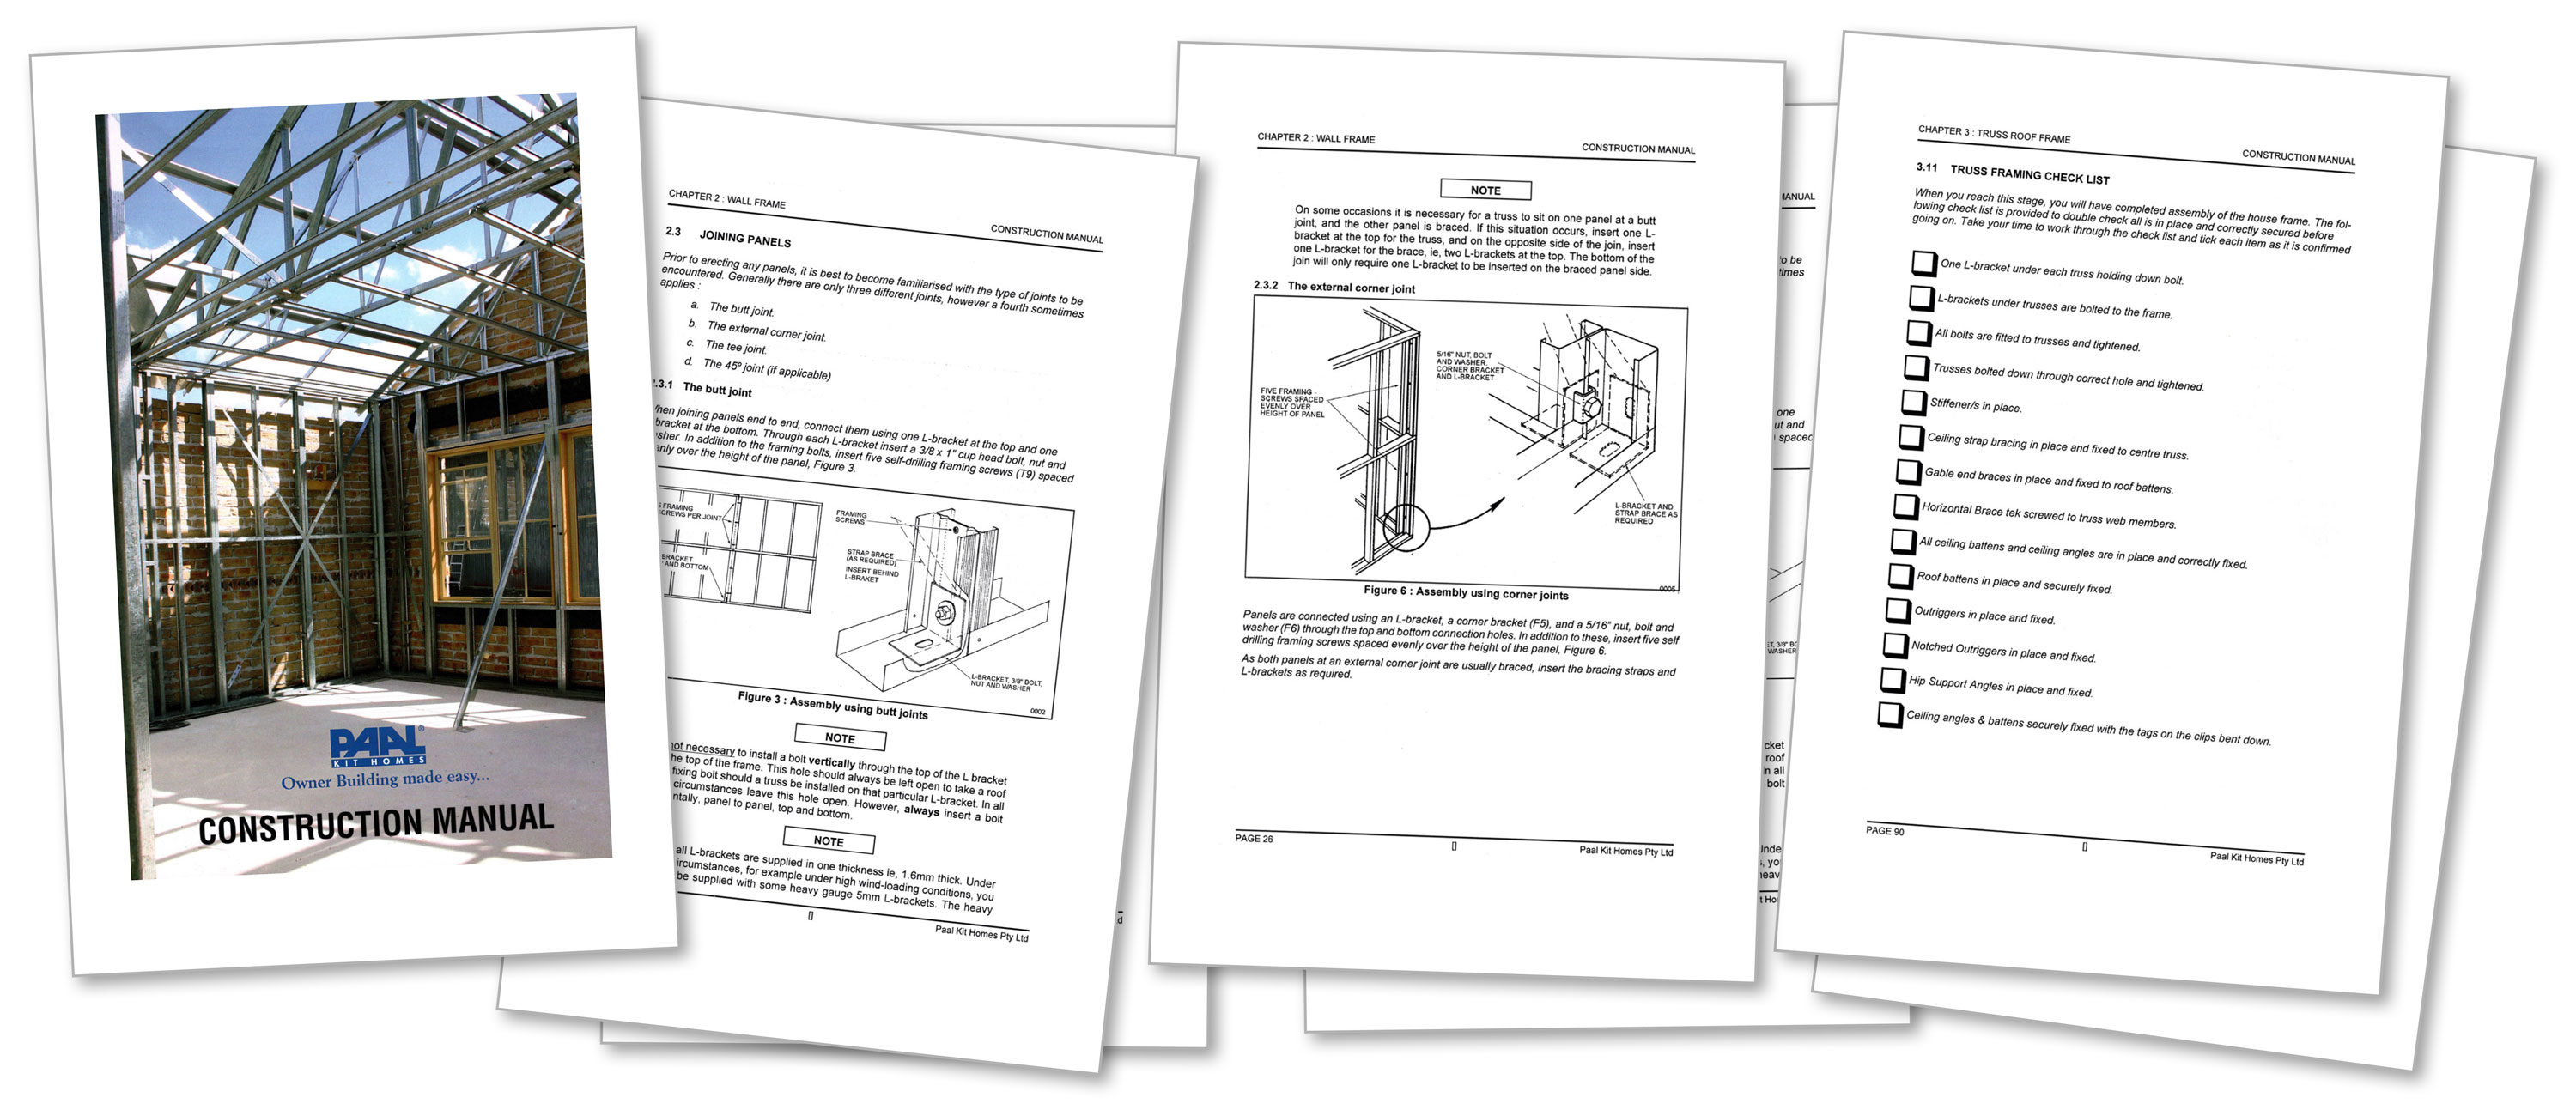 Owner Builder instruction manual pages